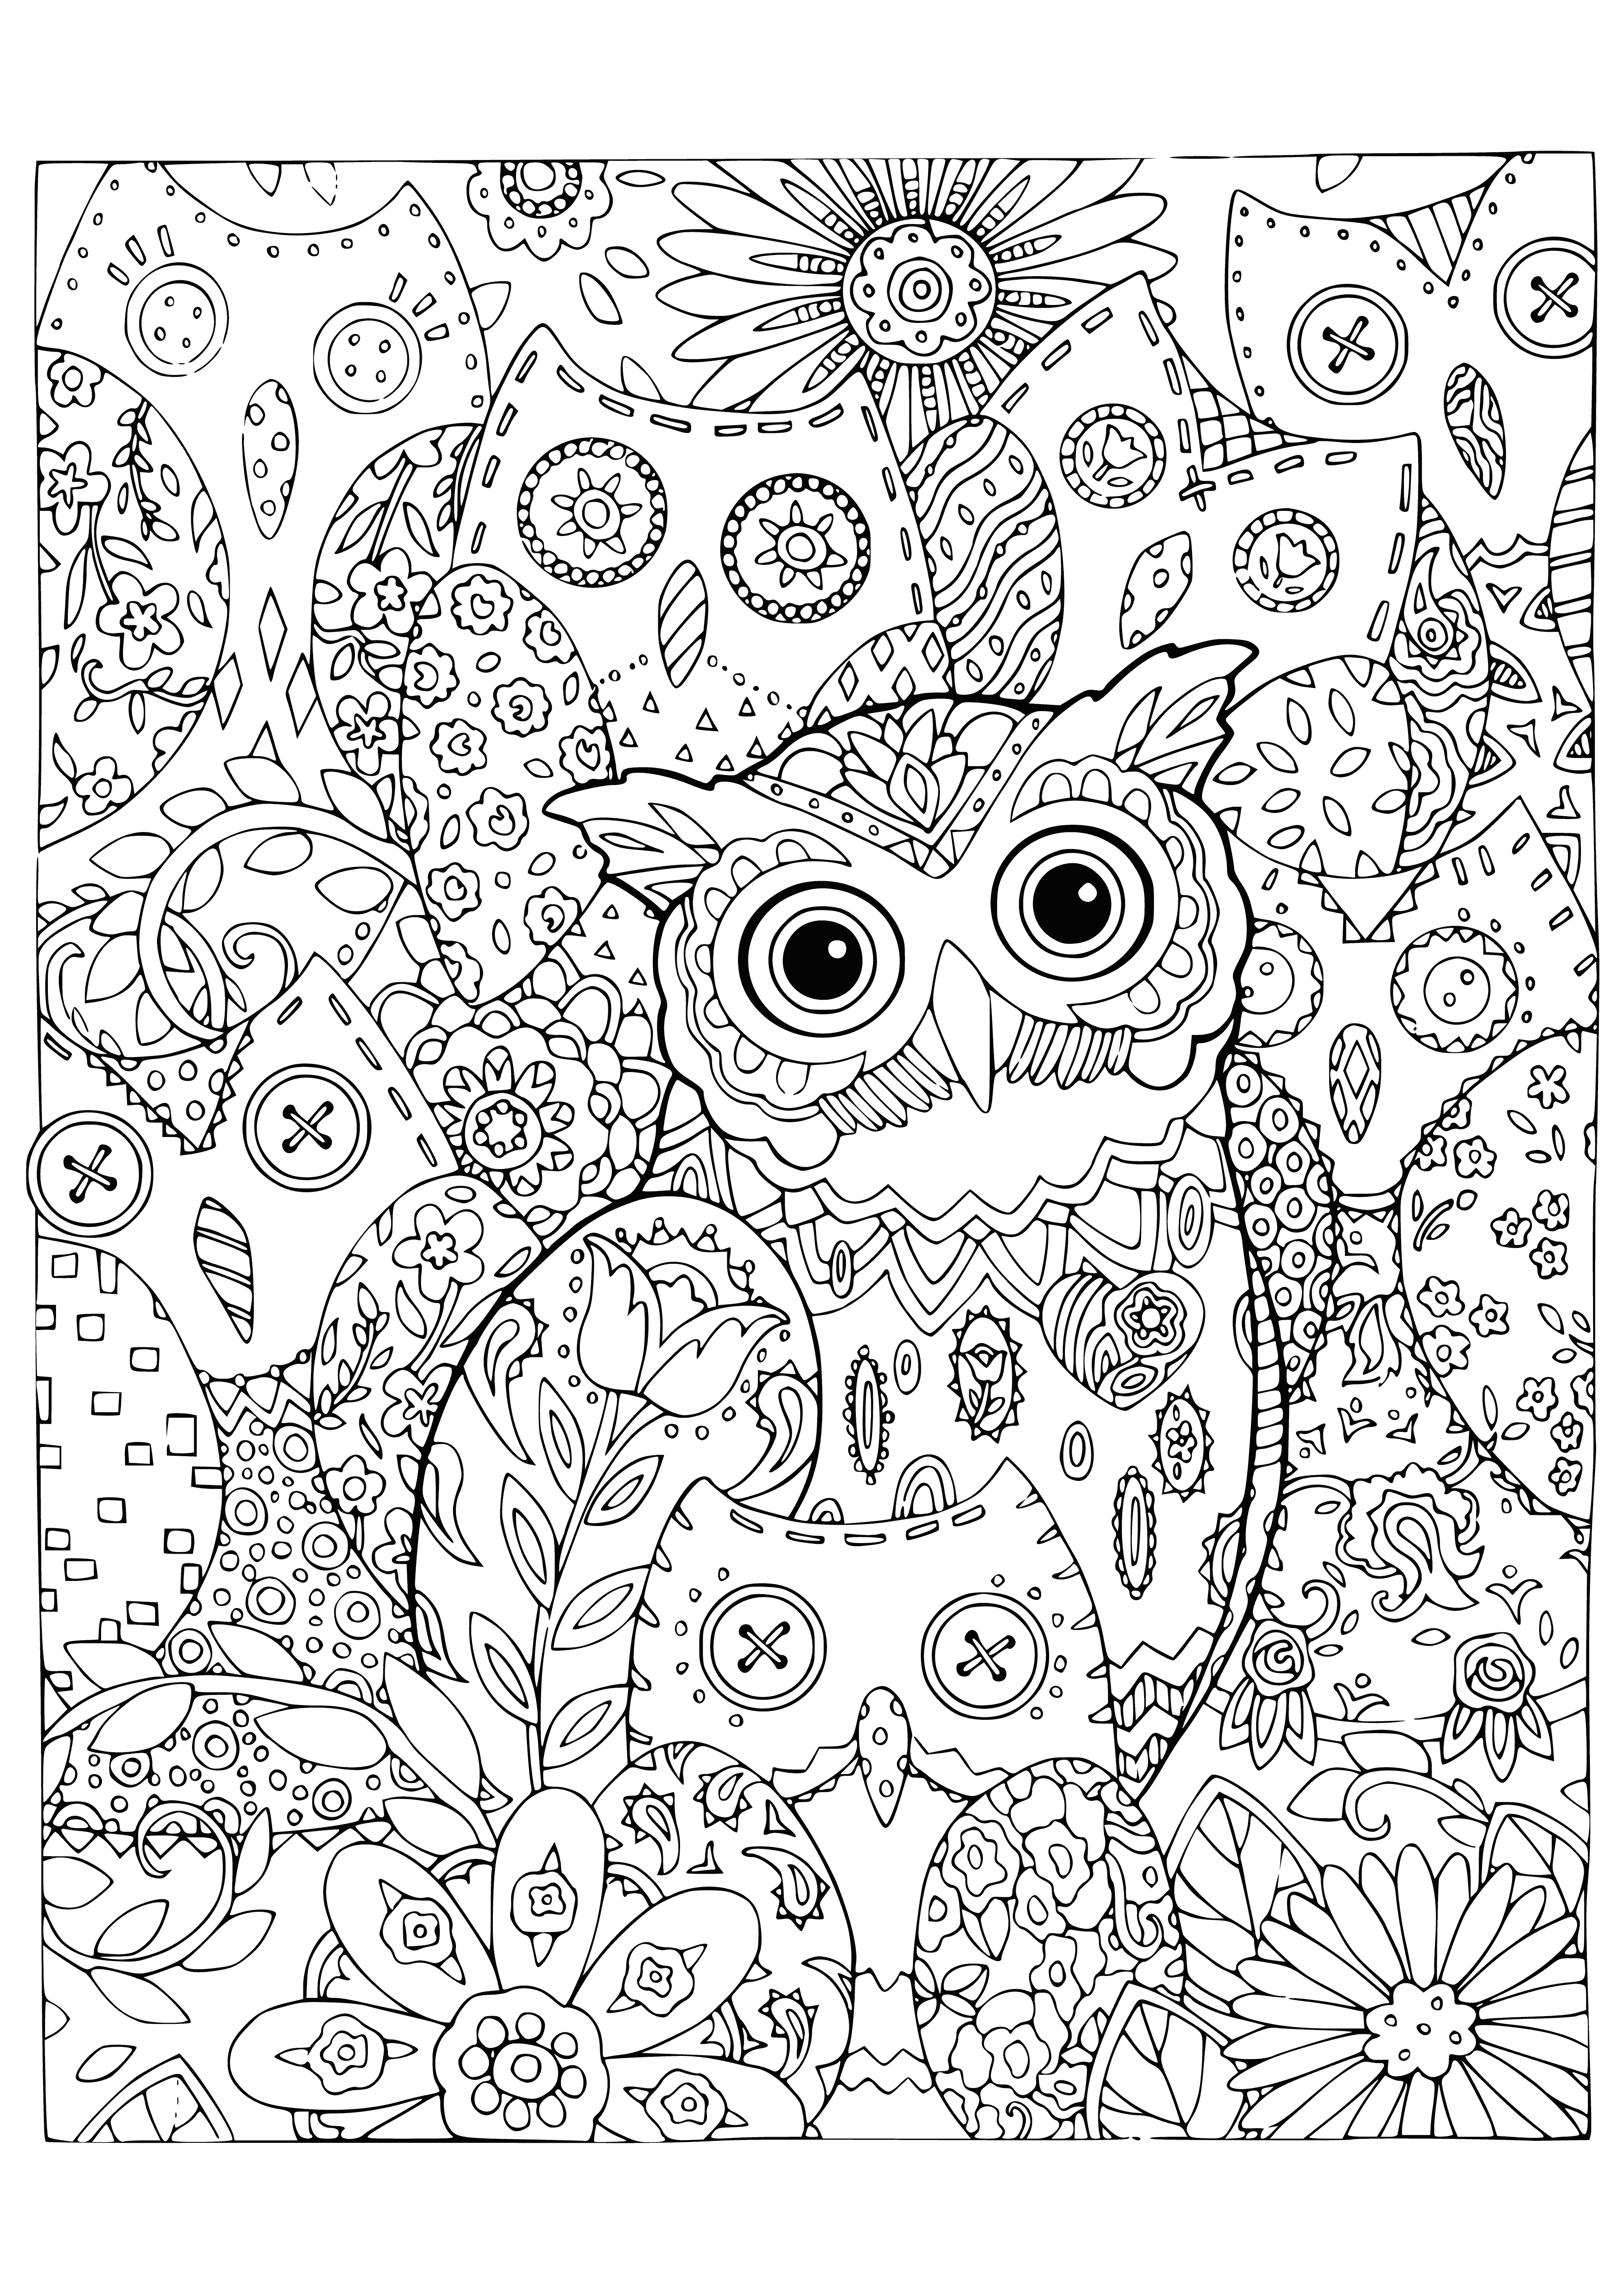 coloring page: Two owls on branches, one looking up & one looking down, with brown & gray color schemes.